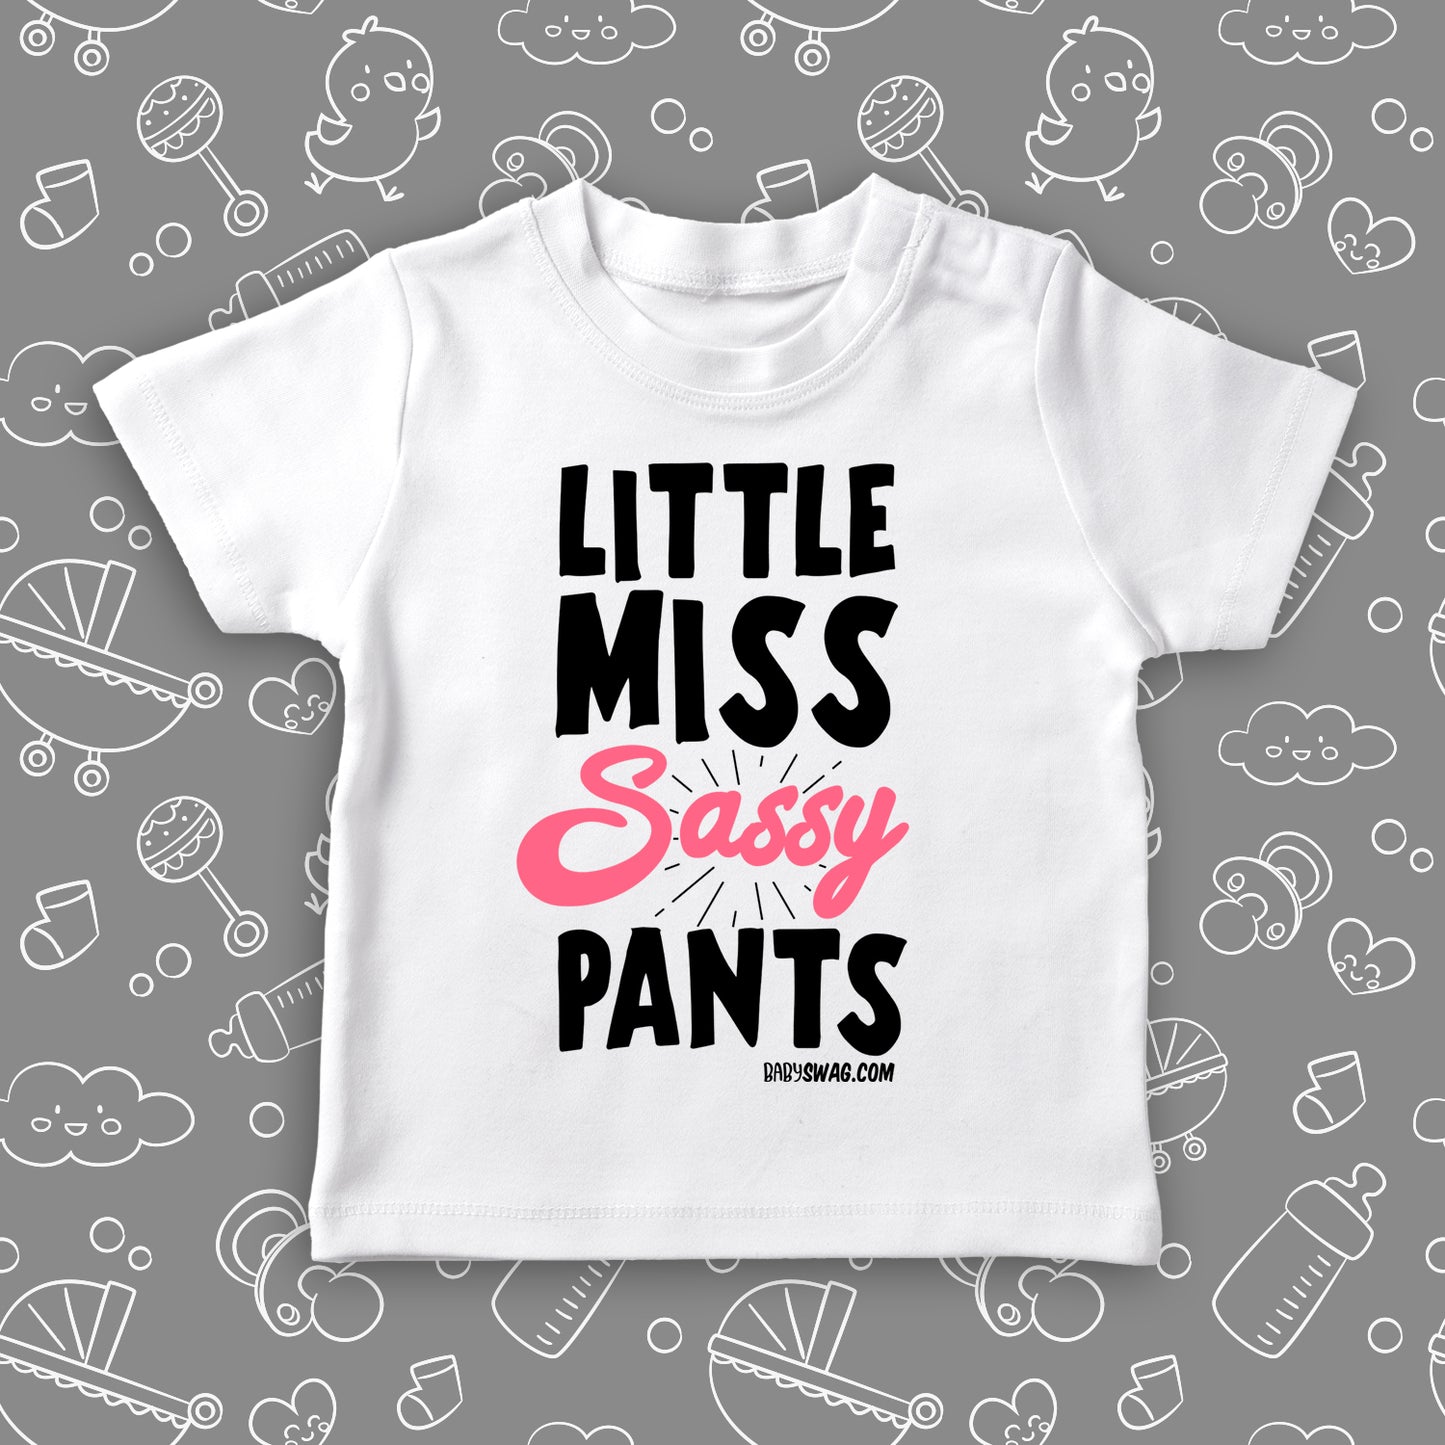 White toddler girl shirt with saying "Little Miss Sassy Pants".